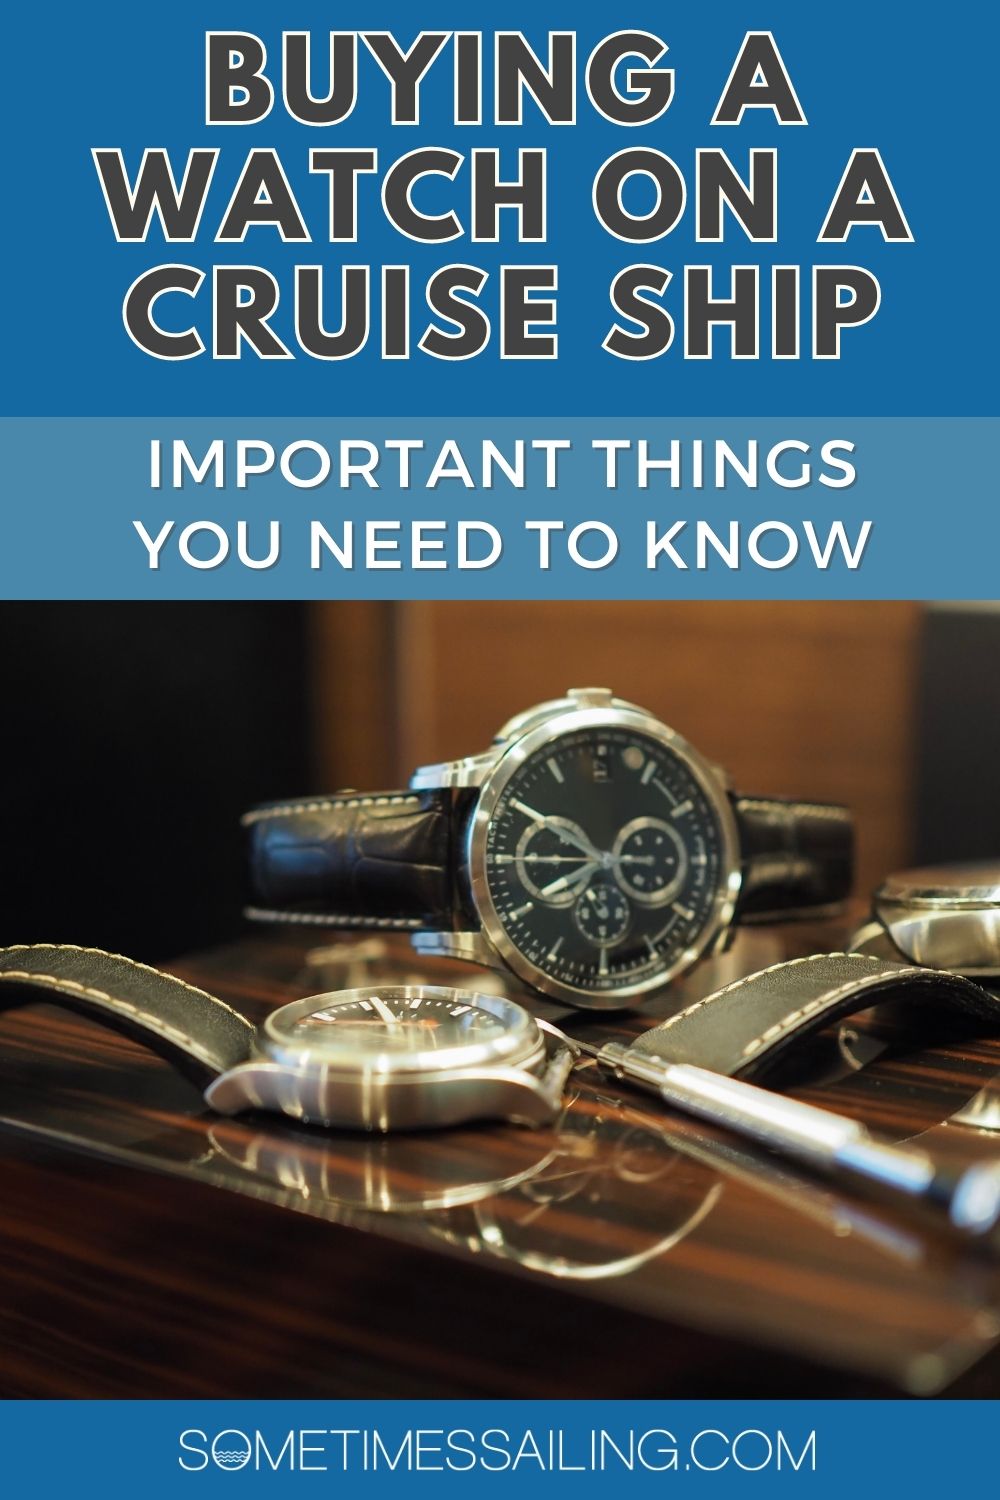 Buying a watch on a cruise ship: important things you need to know with a watch photo.